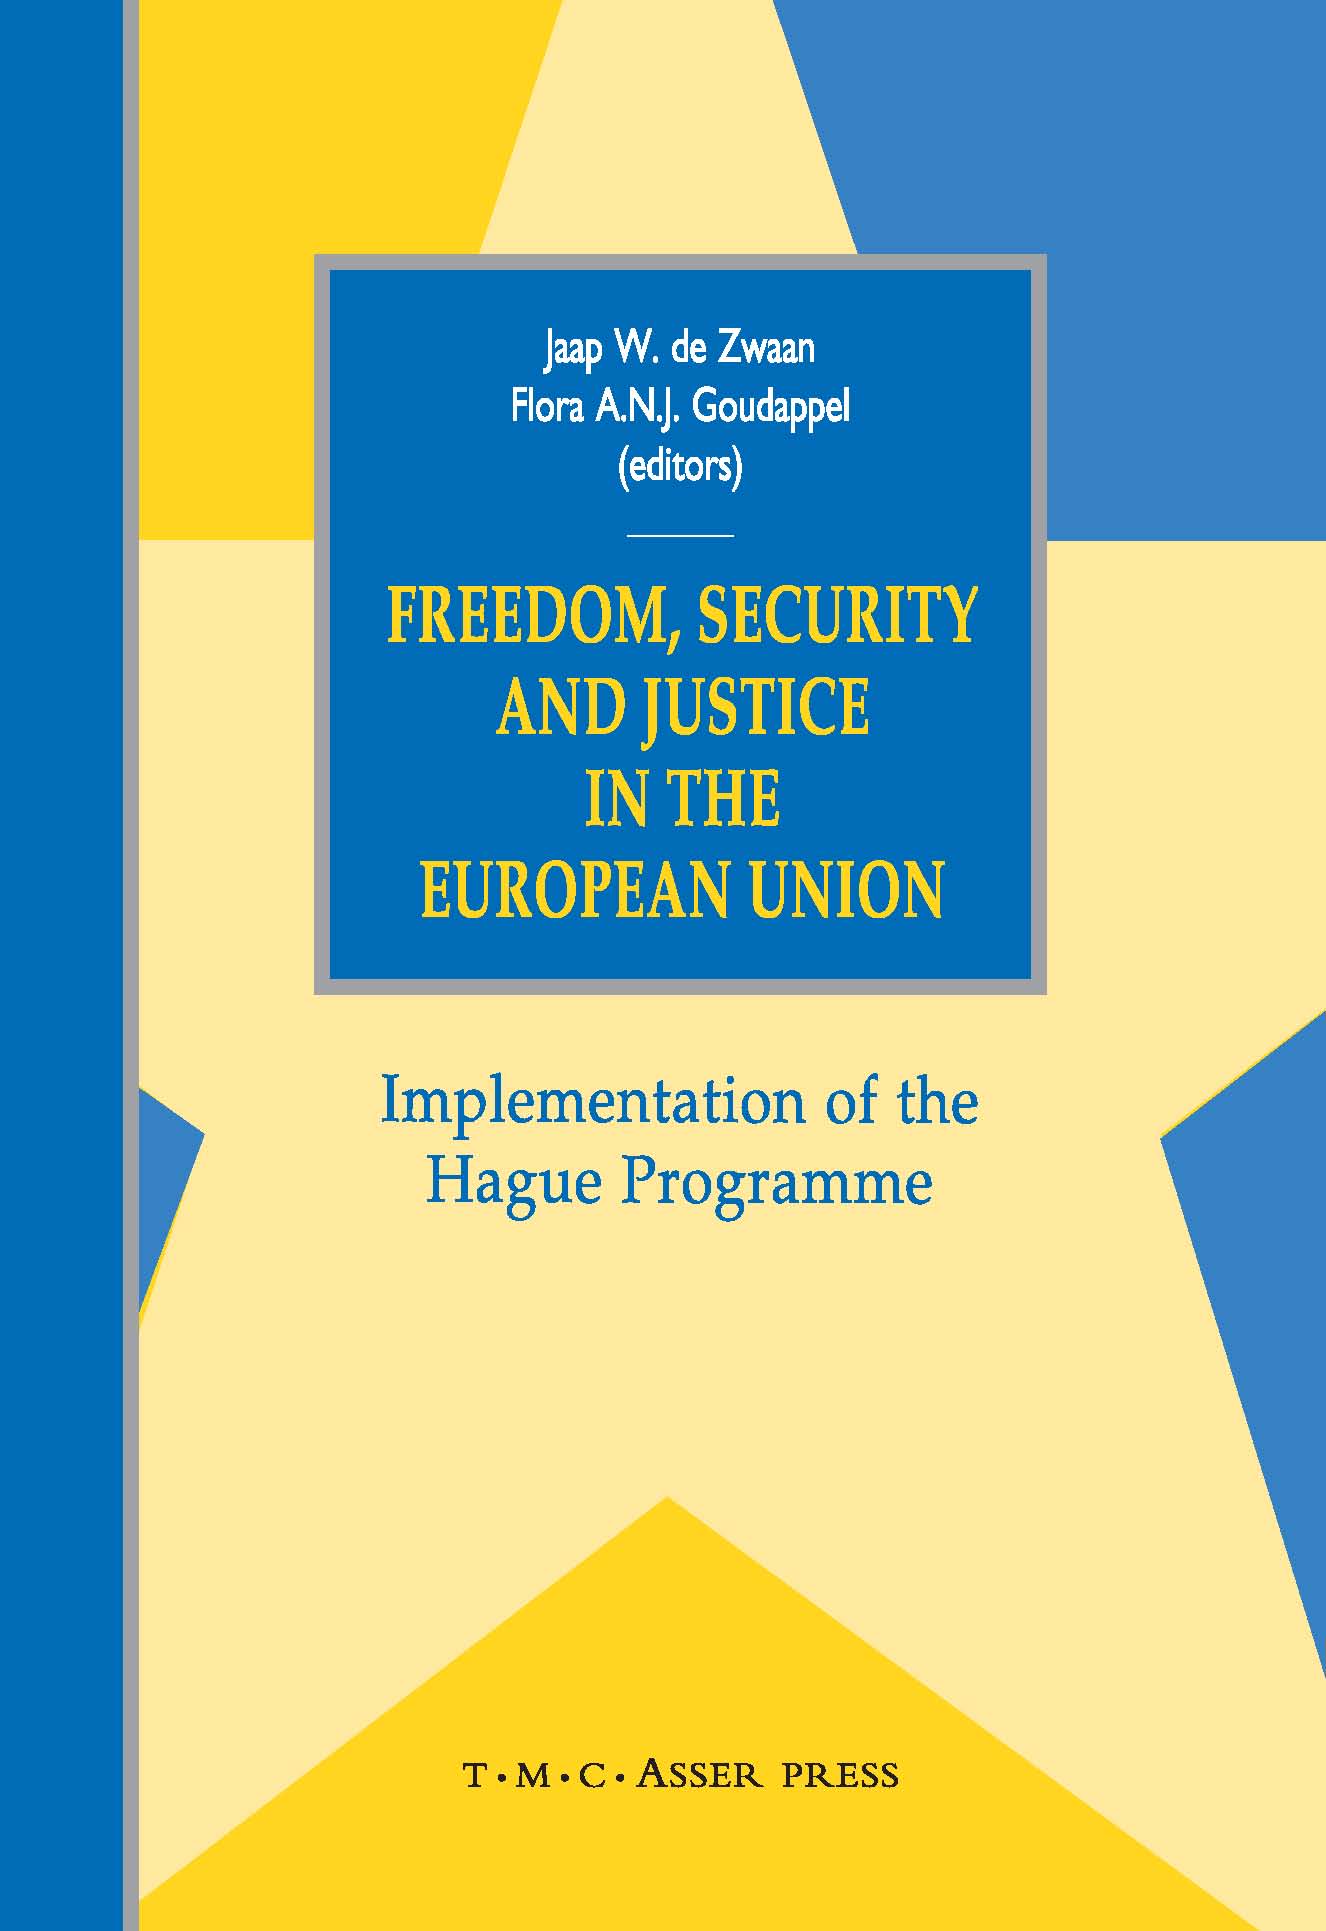 Freedom, Security and Justice in the European Union - Implementation of the Hague Programme 2004